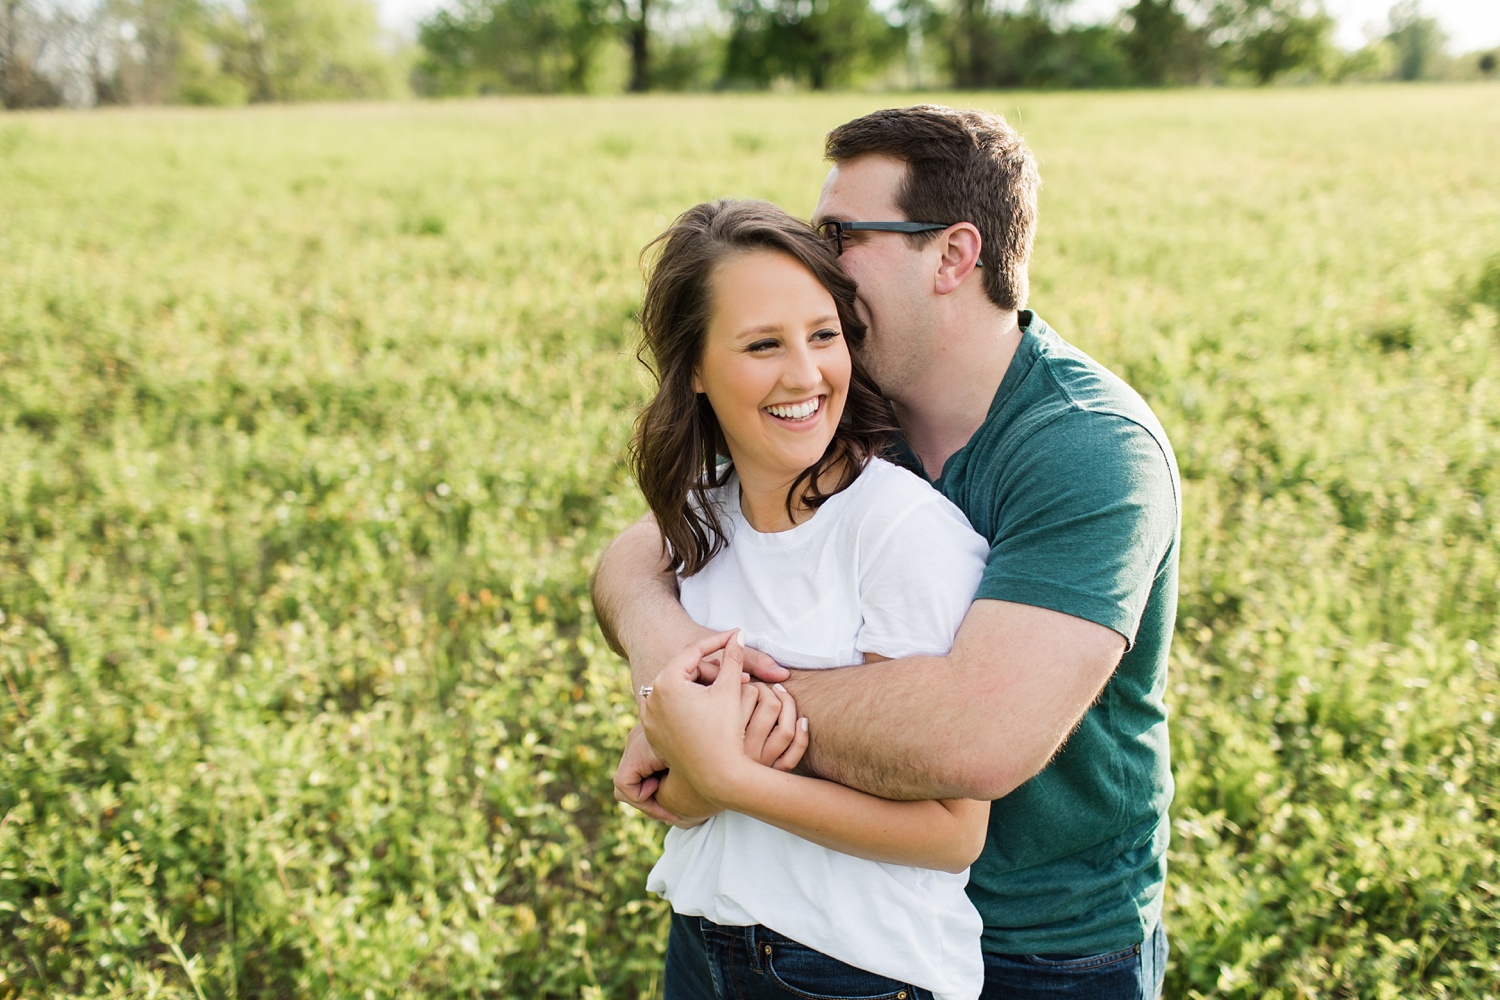 Philander Chase Knox Estate Engagement Photography | Valley Forge Park Wedding Photographer | Brianne and Zach